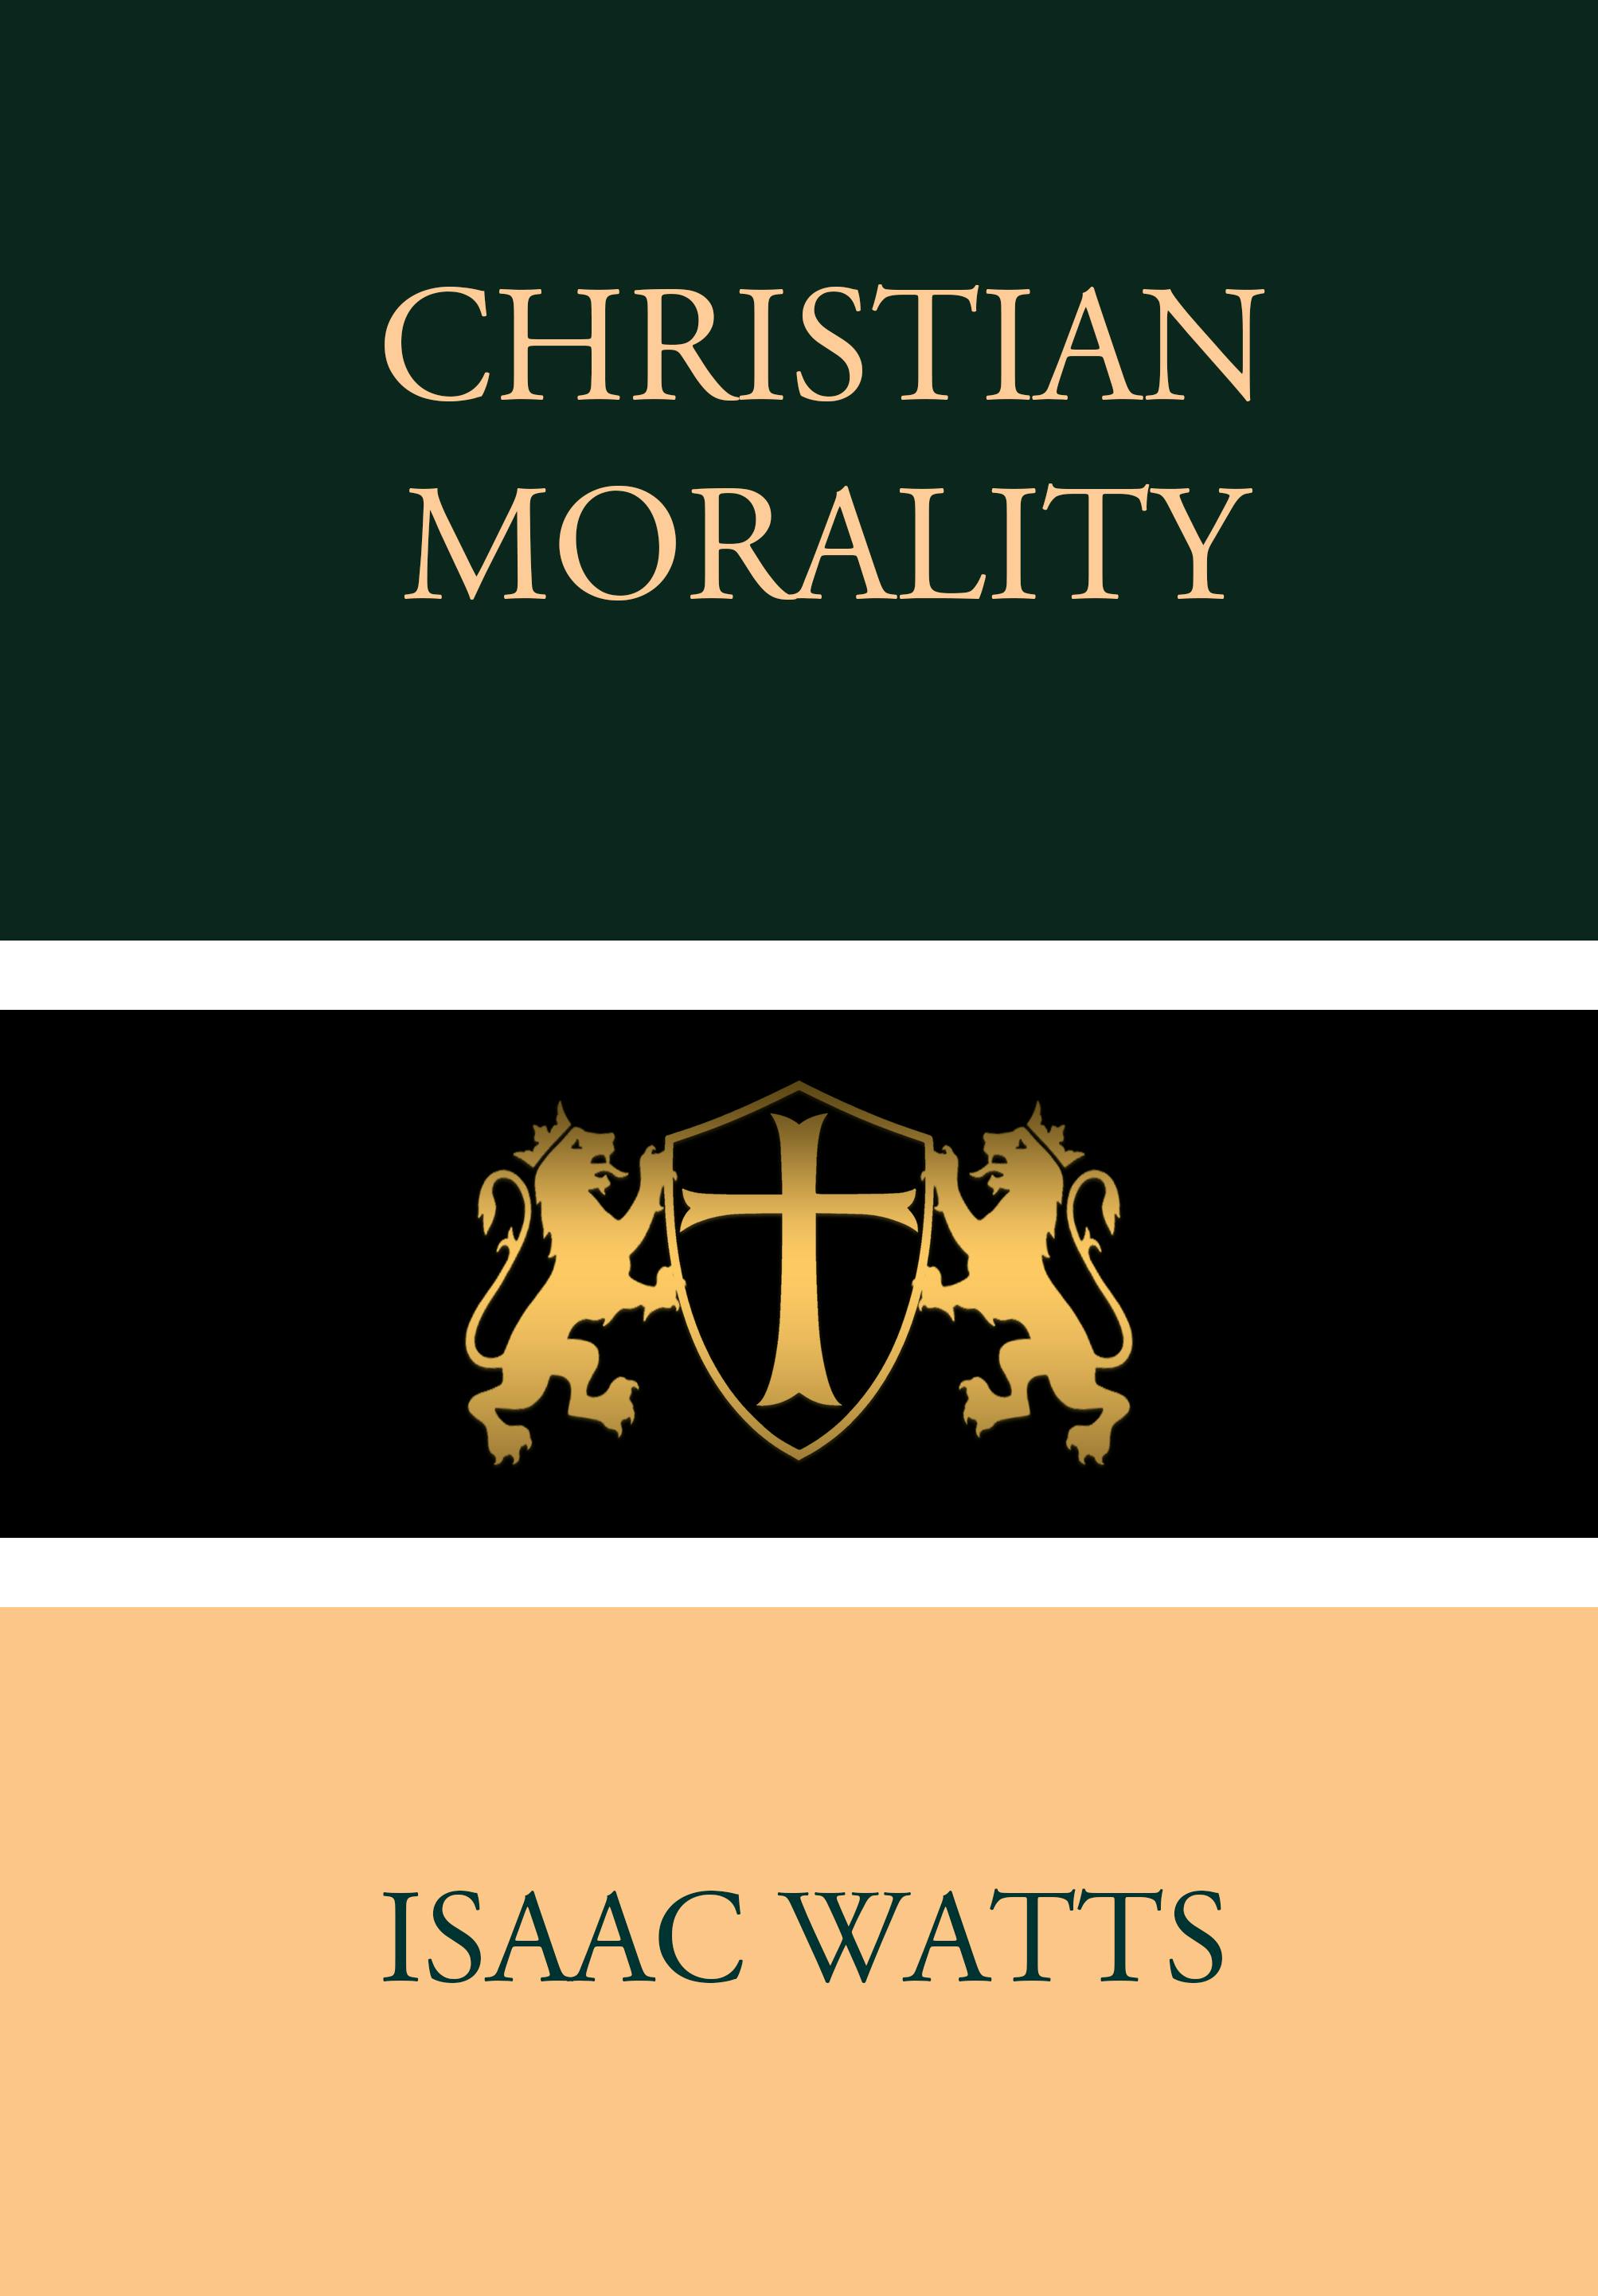 Christian Morality - undefined